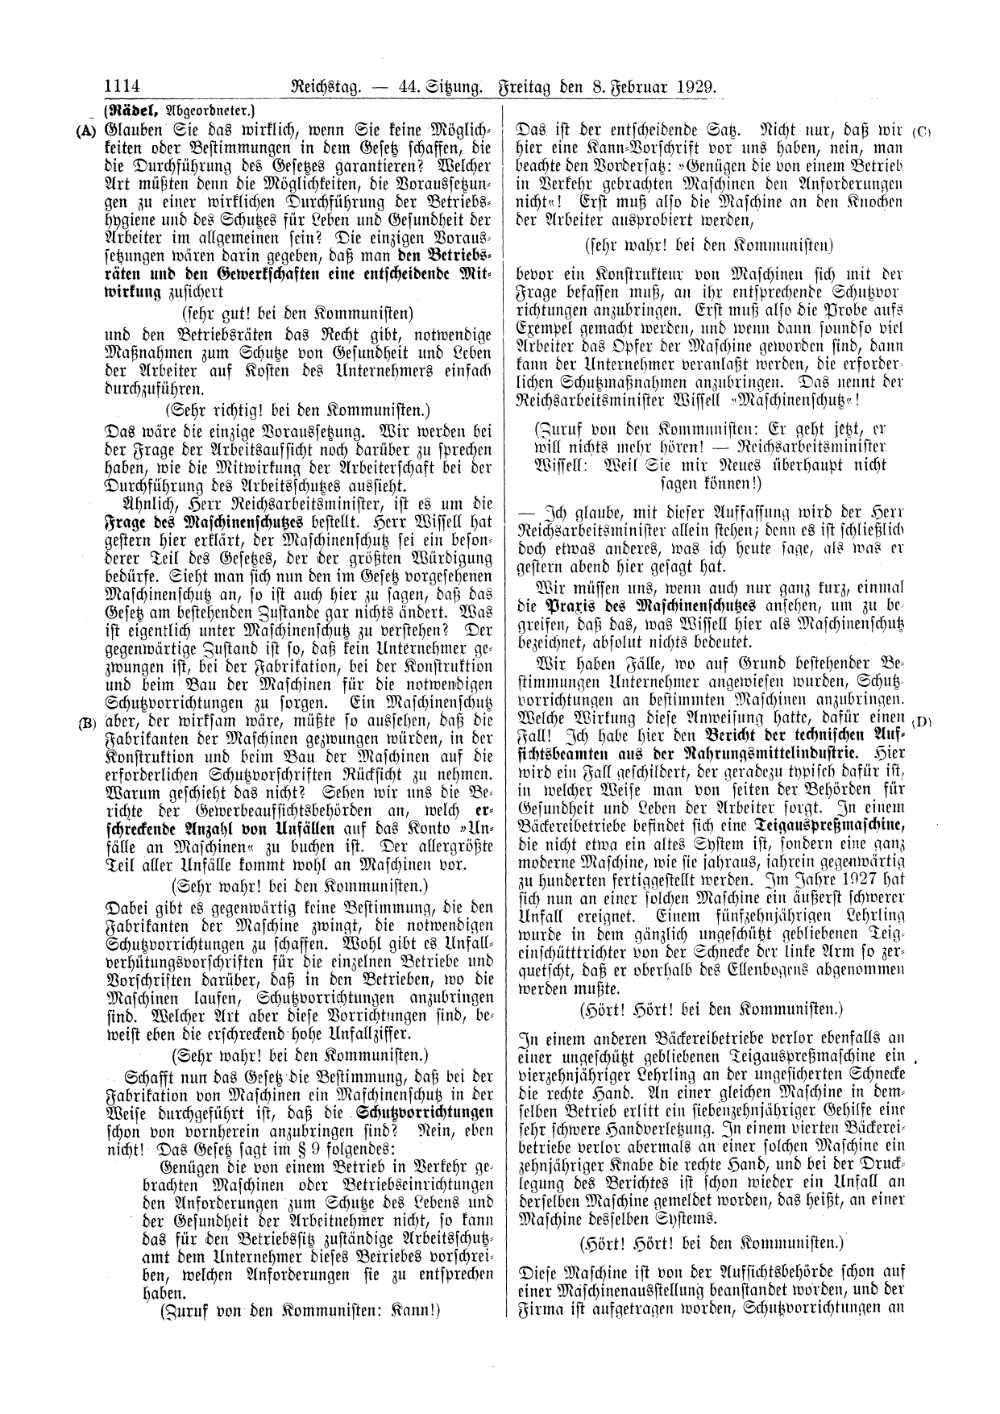 Scan of page 1114